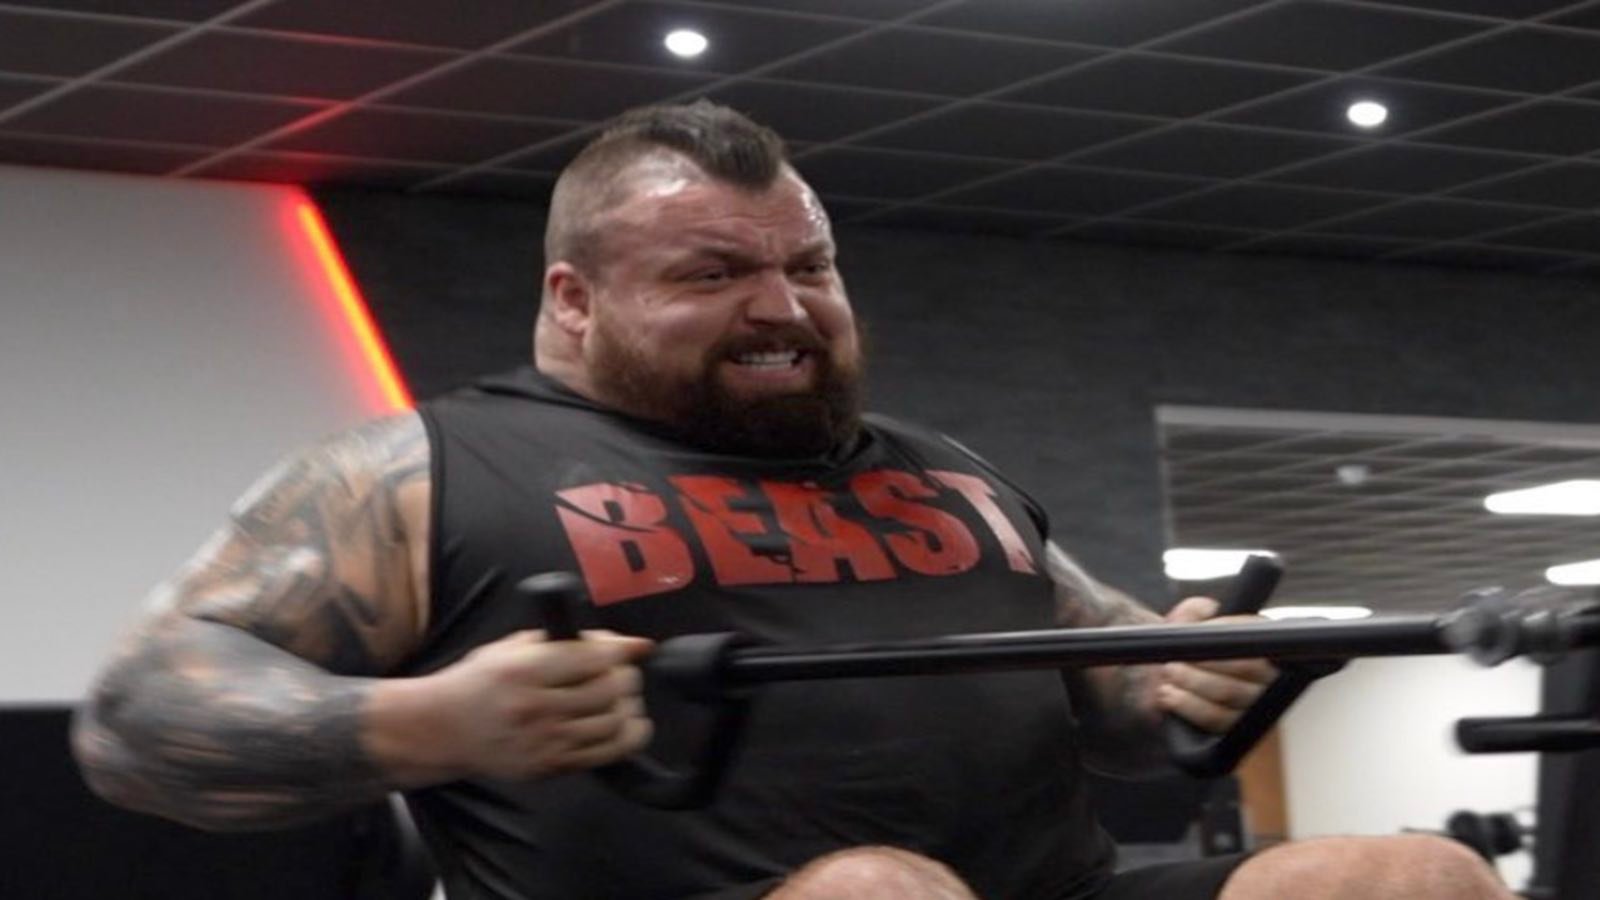 eddie-hall-takes-another-step-toward-bodybuilding-with-an-intense-back-workout-–-breaking-muscle